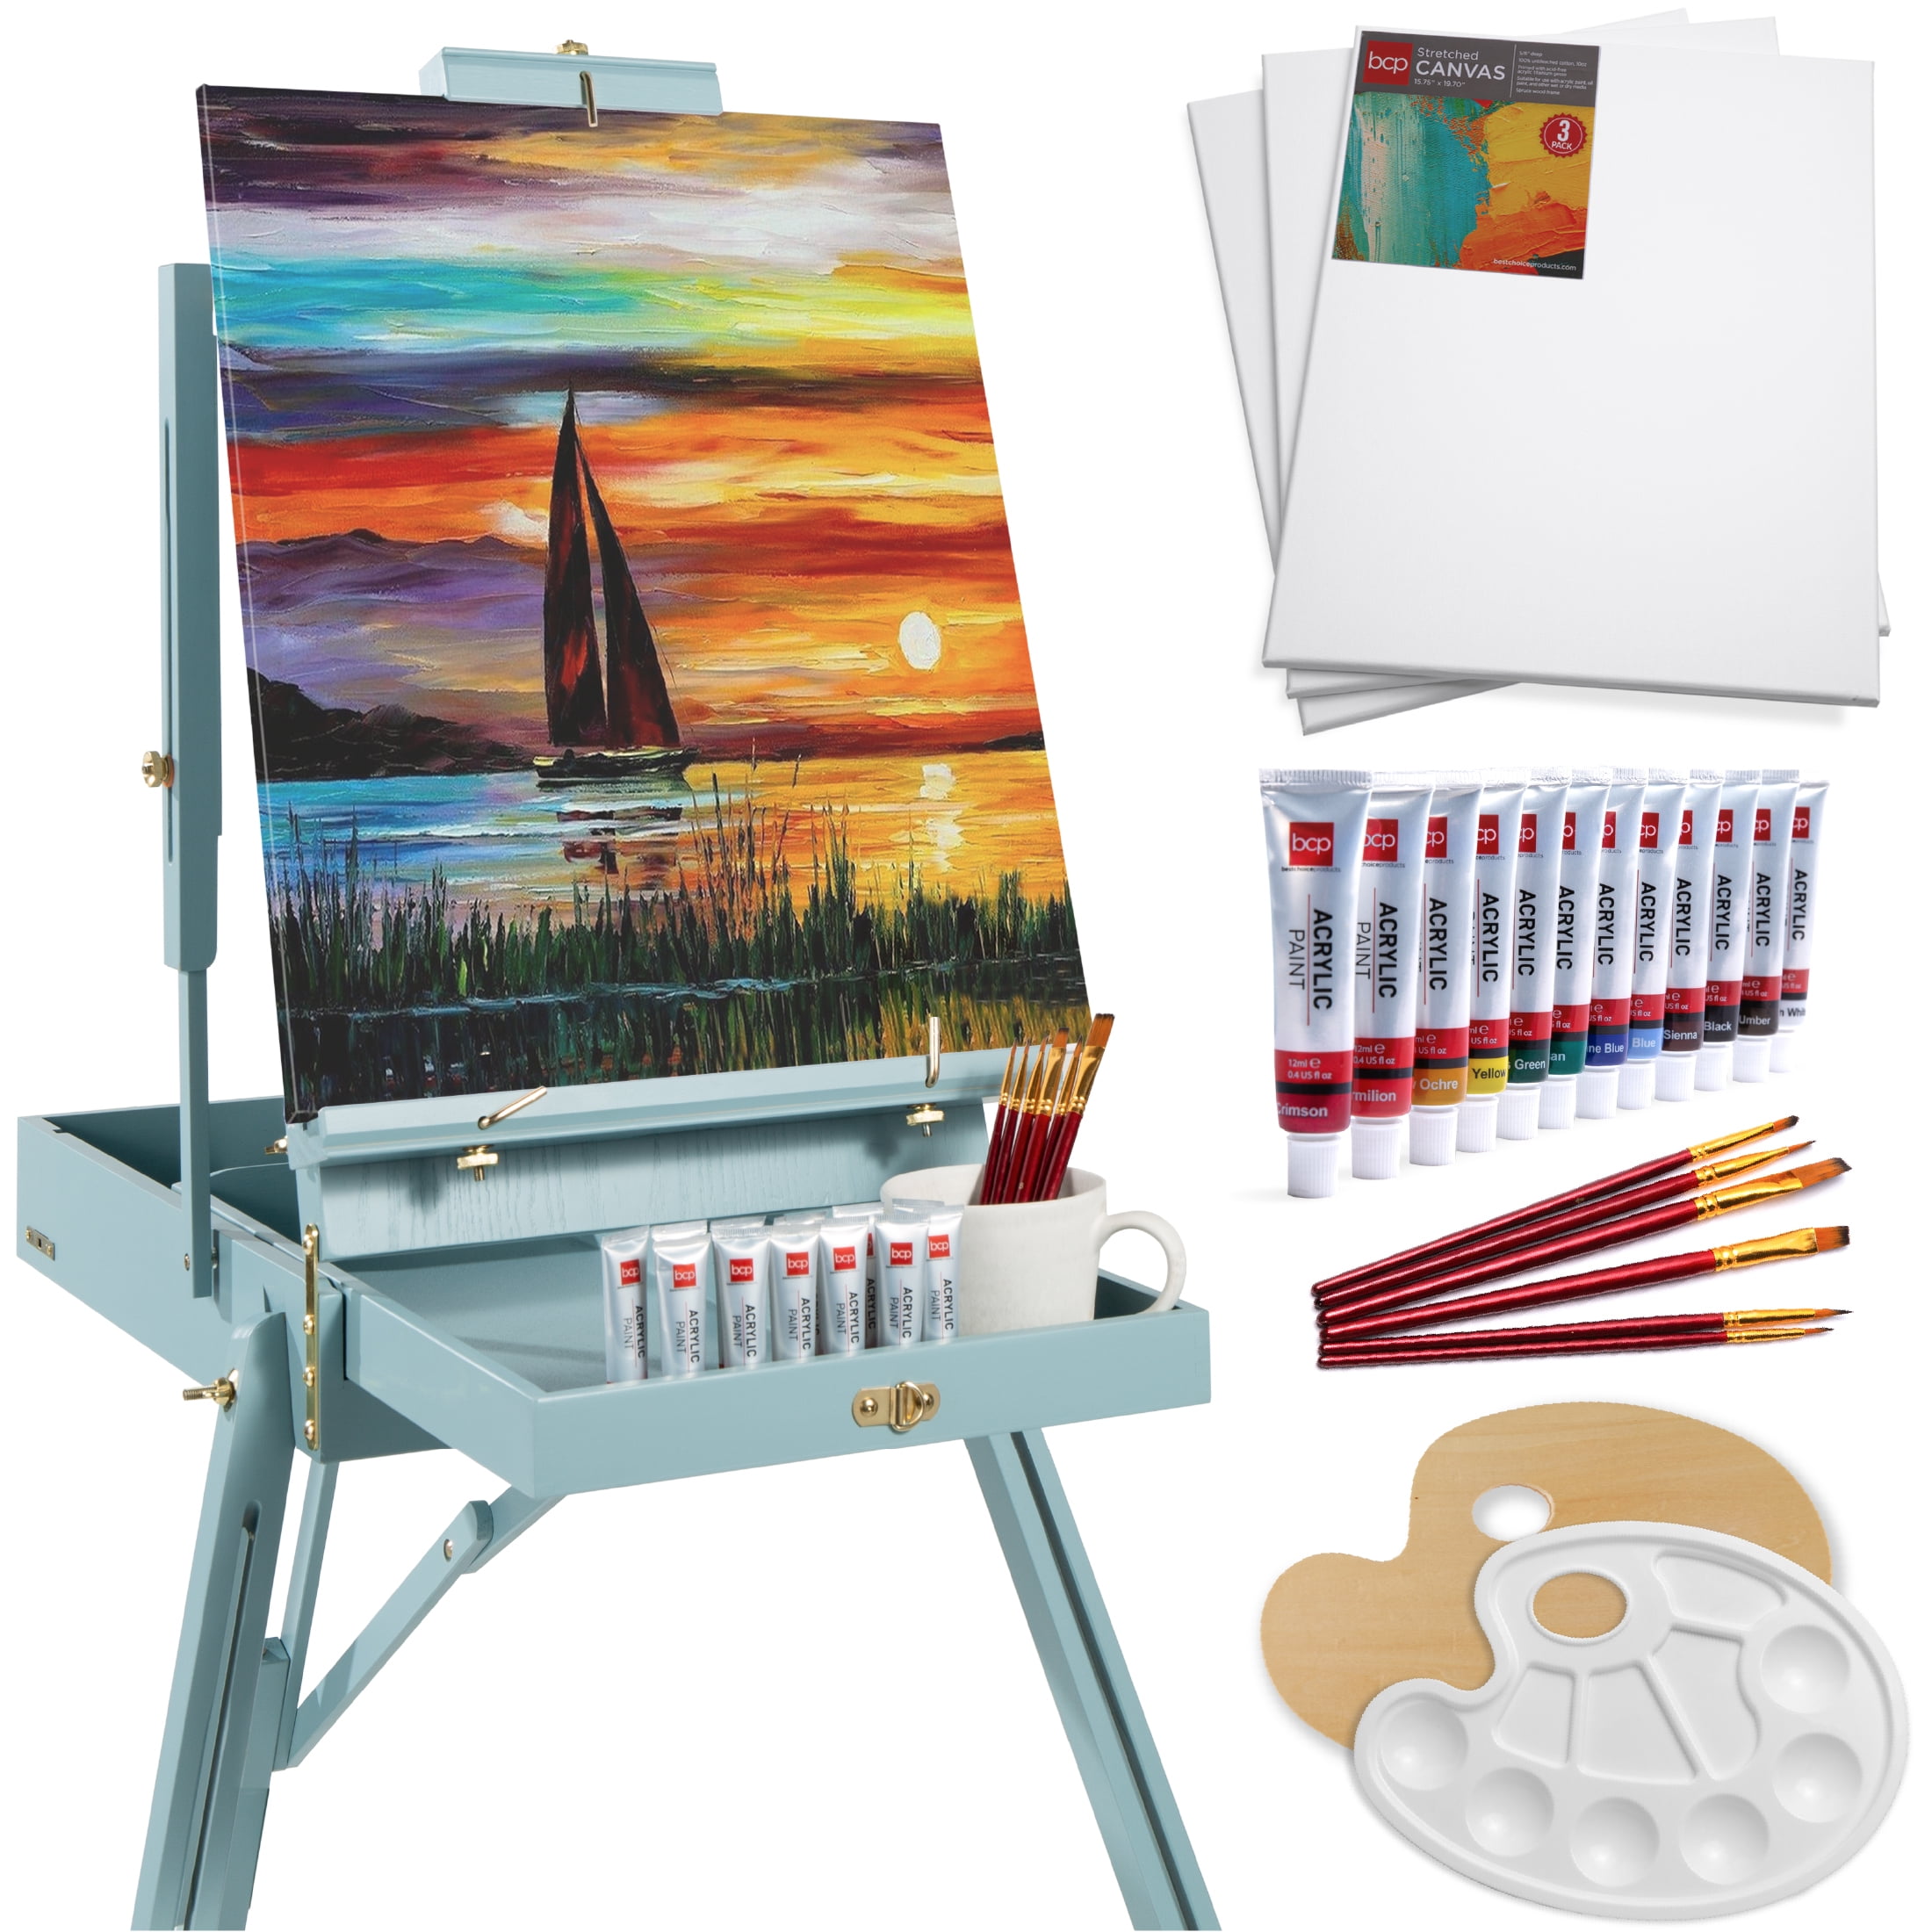 Best Choice Products Portable Folding French Wooden Art Easel Sketch Box with Tripod for Artists, Painters